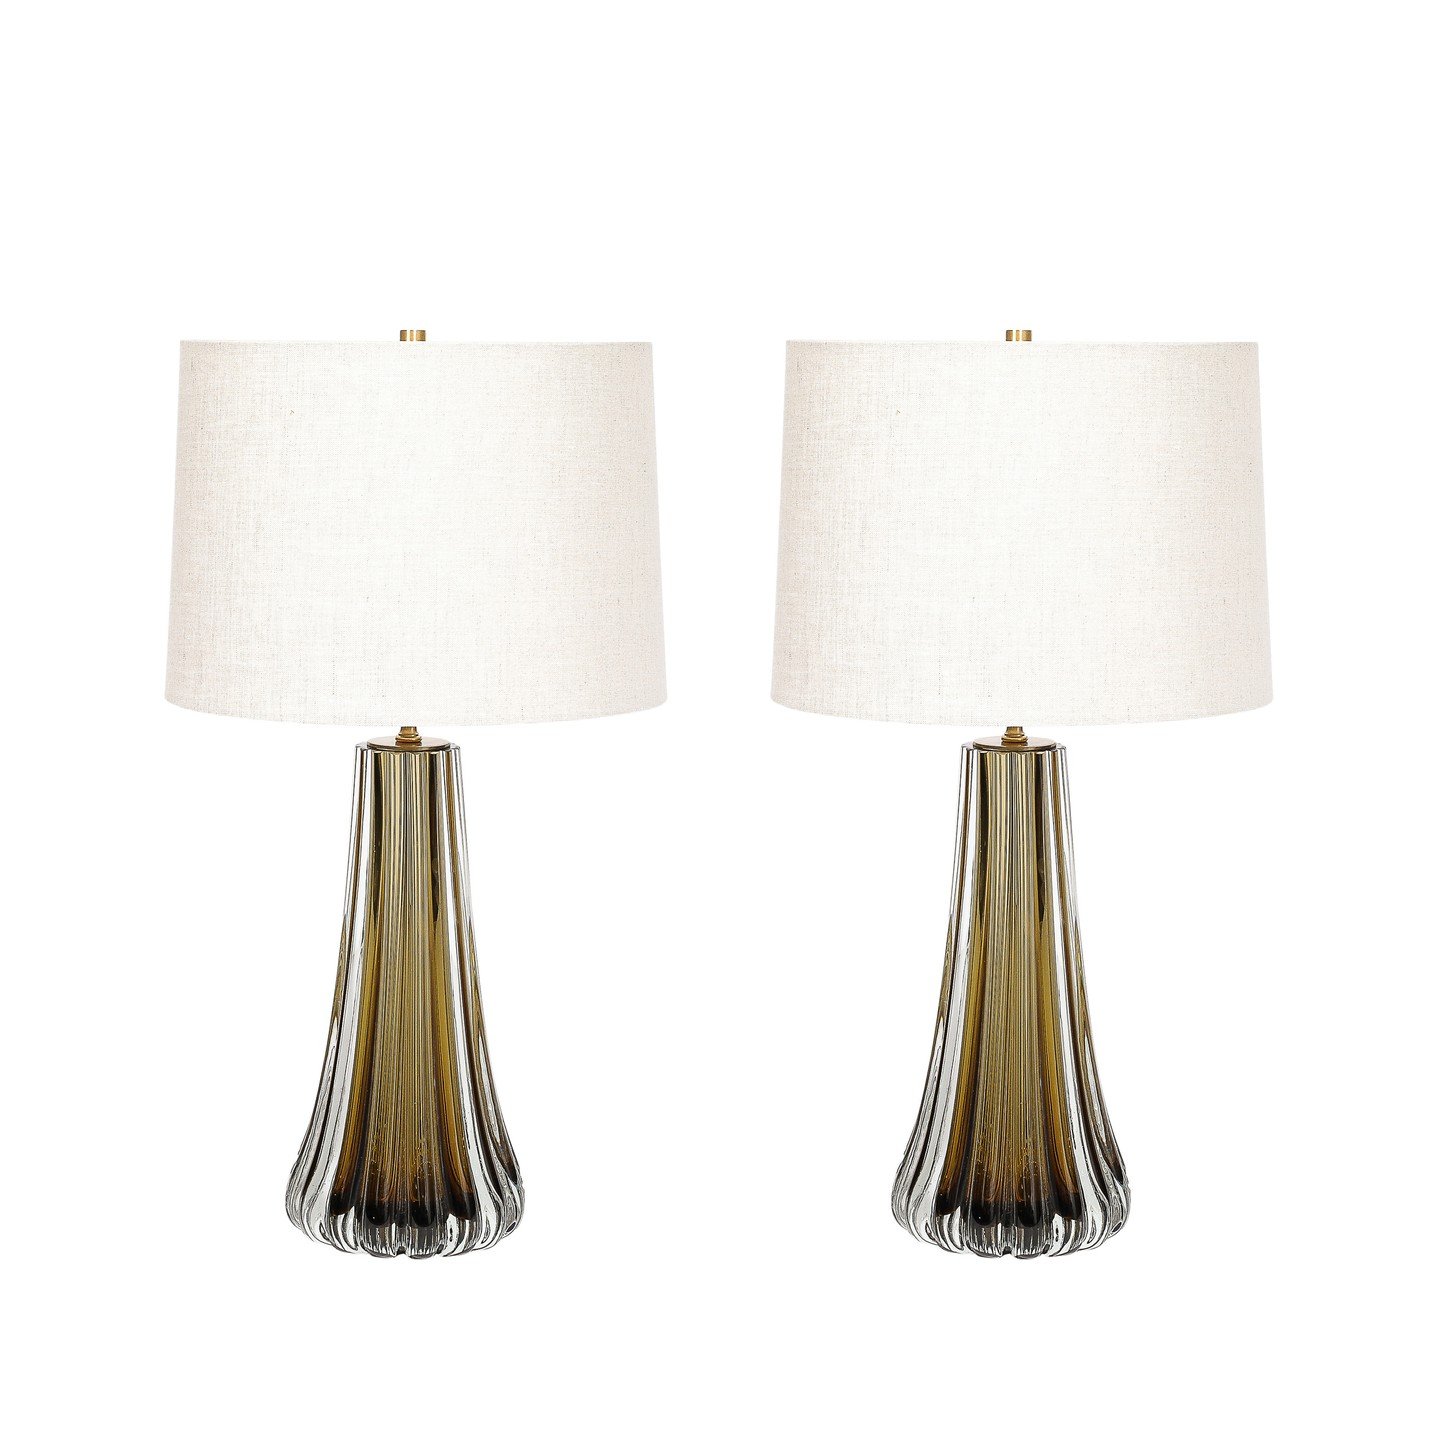 Modernist Hand-Blown Fluted Smoked Topaz Murano Glass &amp; Brass Table Lamps

This exquisitely elegant Pair of Modernist Hand-Blown Murano Glass Table Lamps in Smoked Topaz W/ Stylized Fluted Detailing originate from Italy during the 21st Century. T